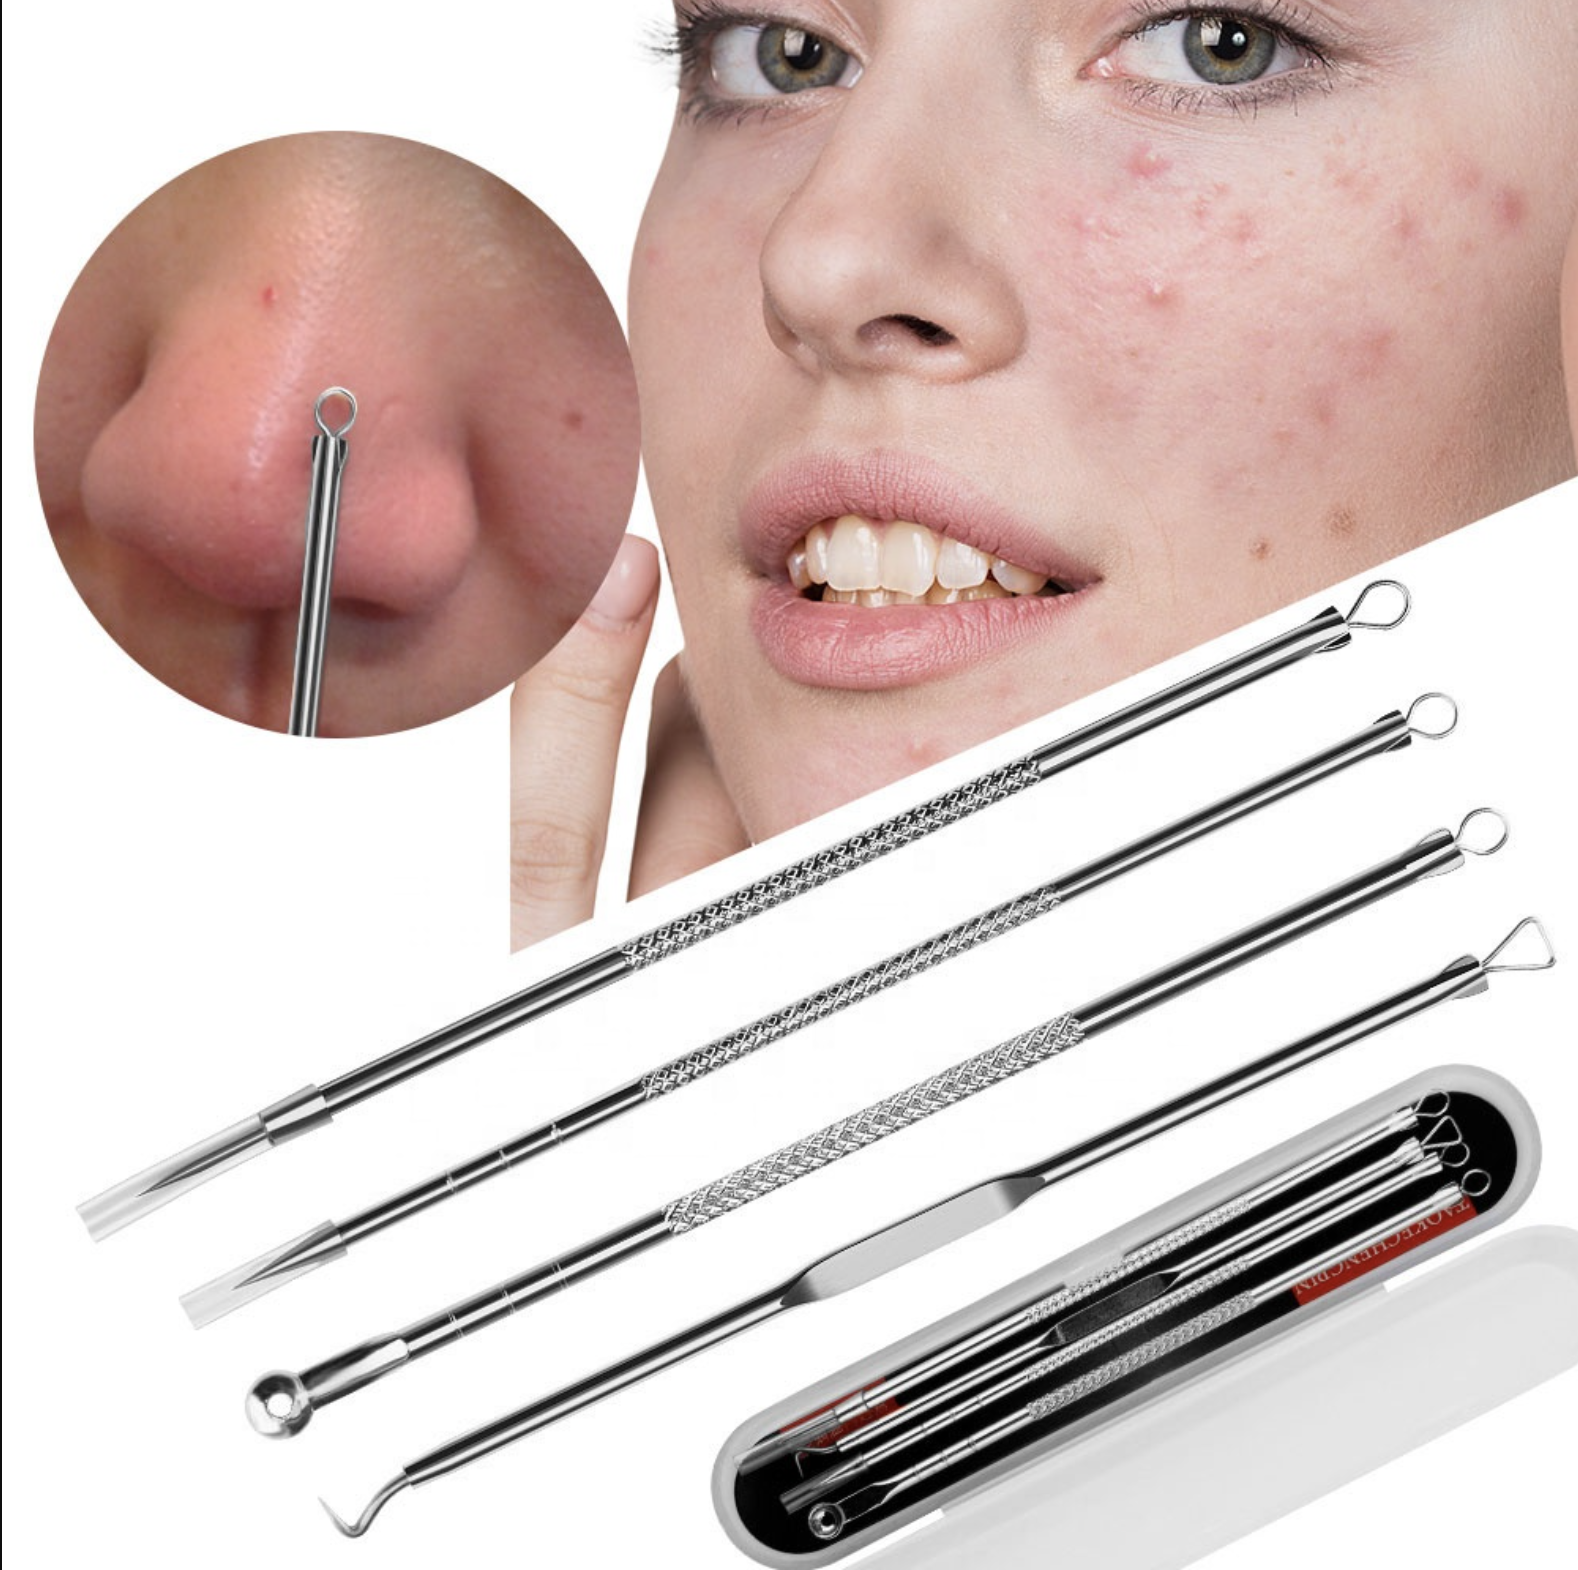 Acne Pimple Now on sale Comedone Extractor 4 Pieces Tools Discount is also underway